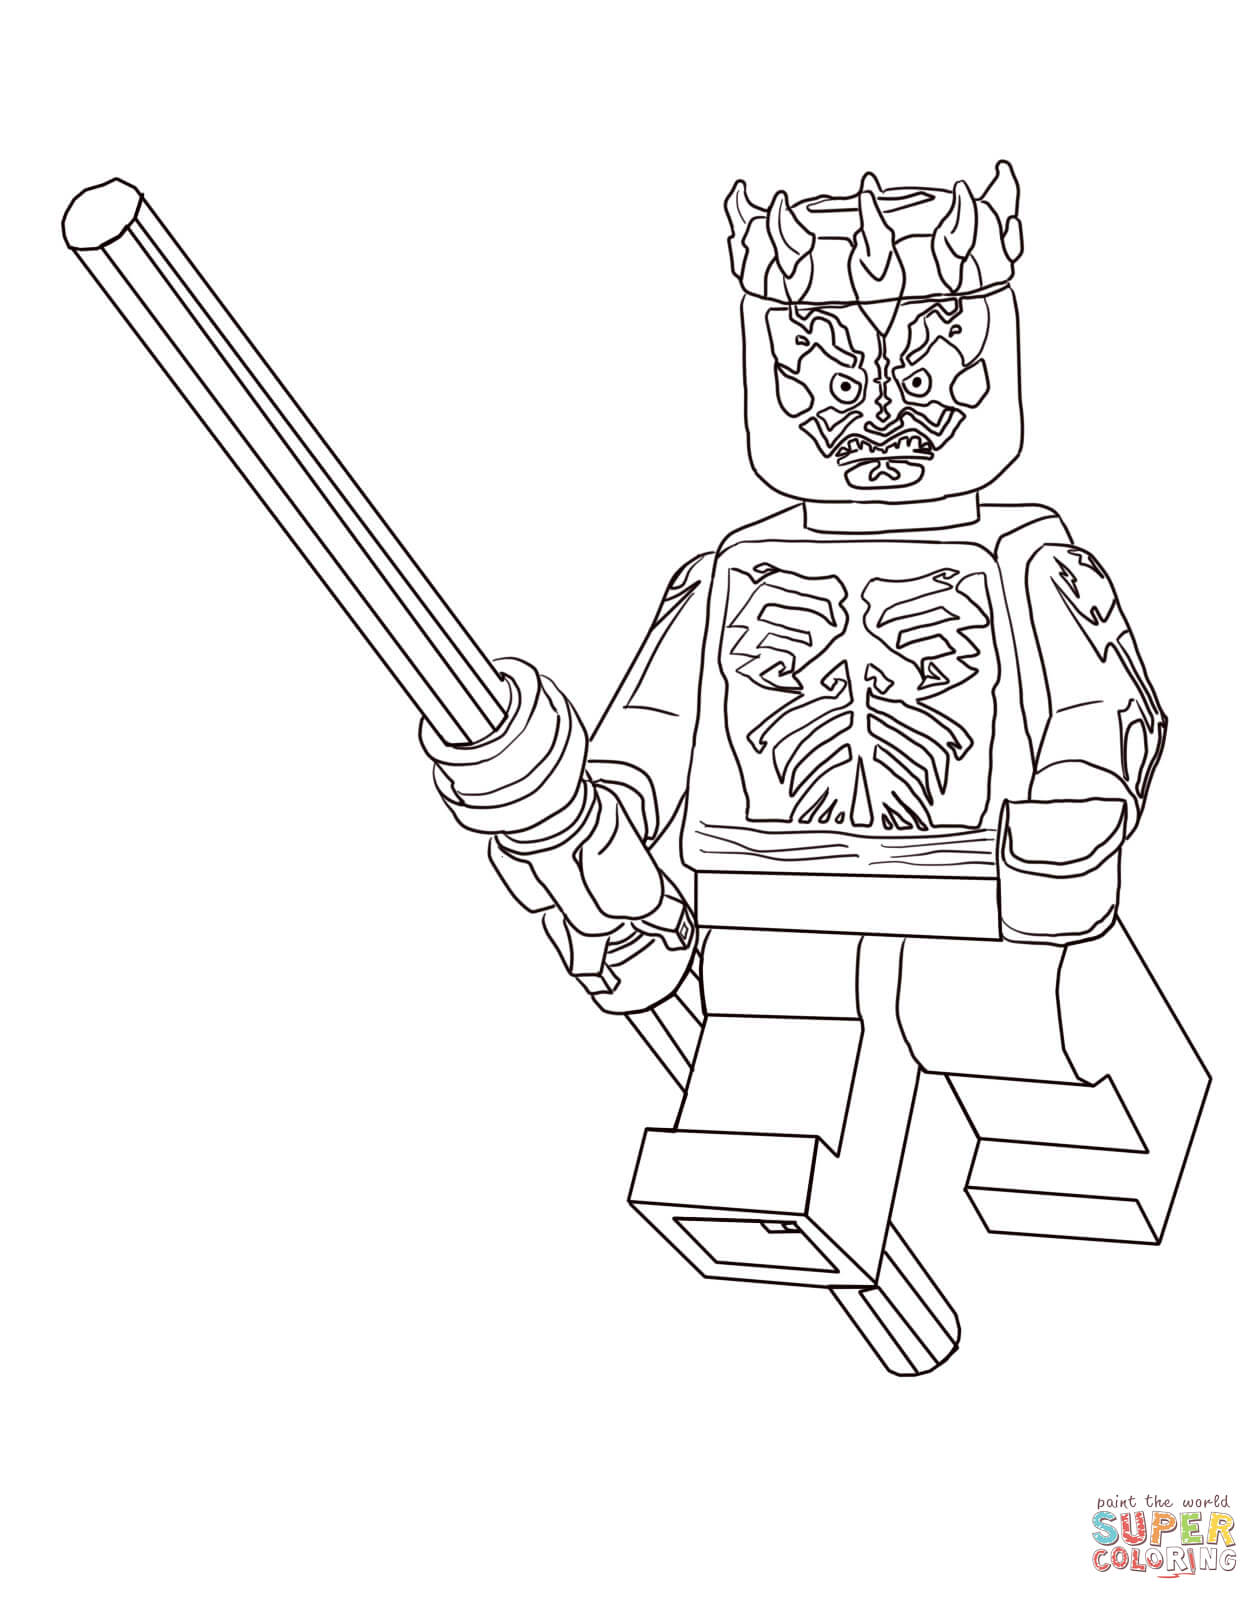 Lego Star Wars coloring pages | Free Coloring Pages